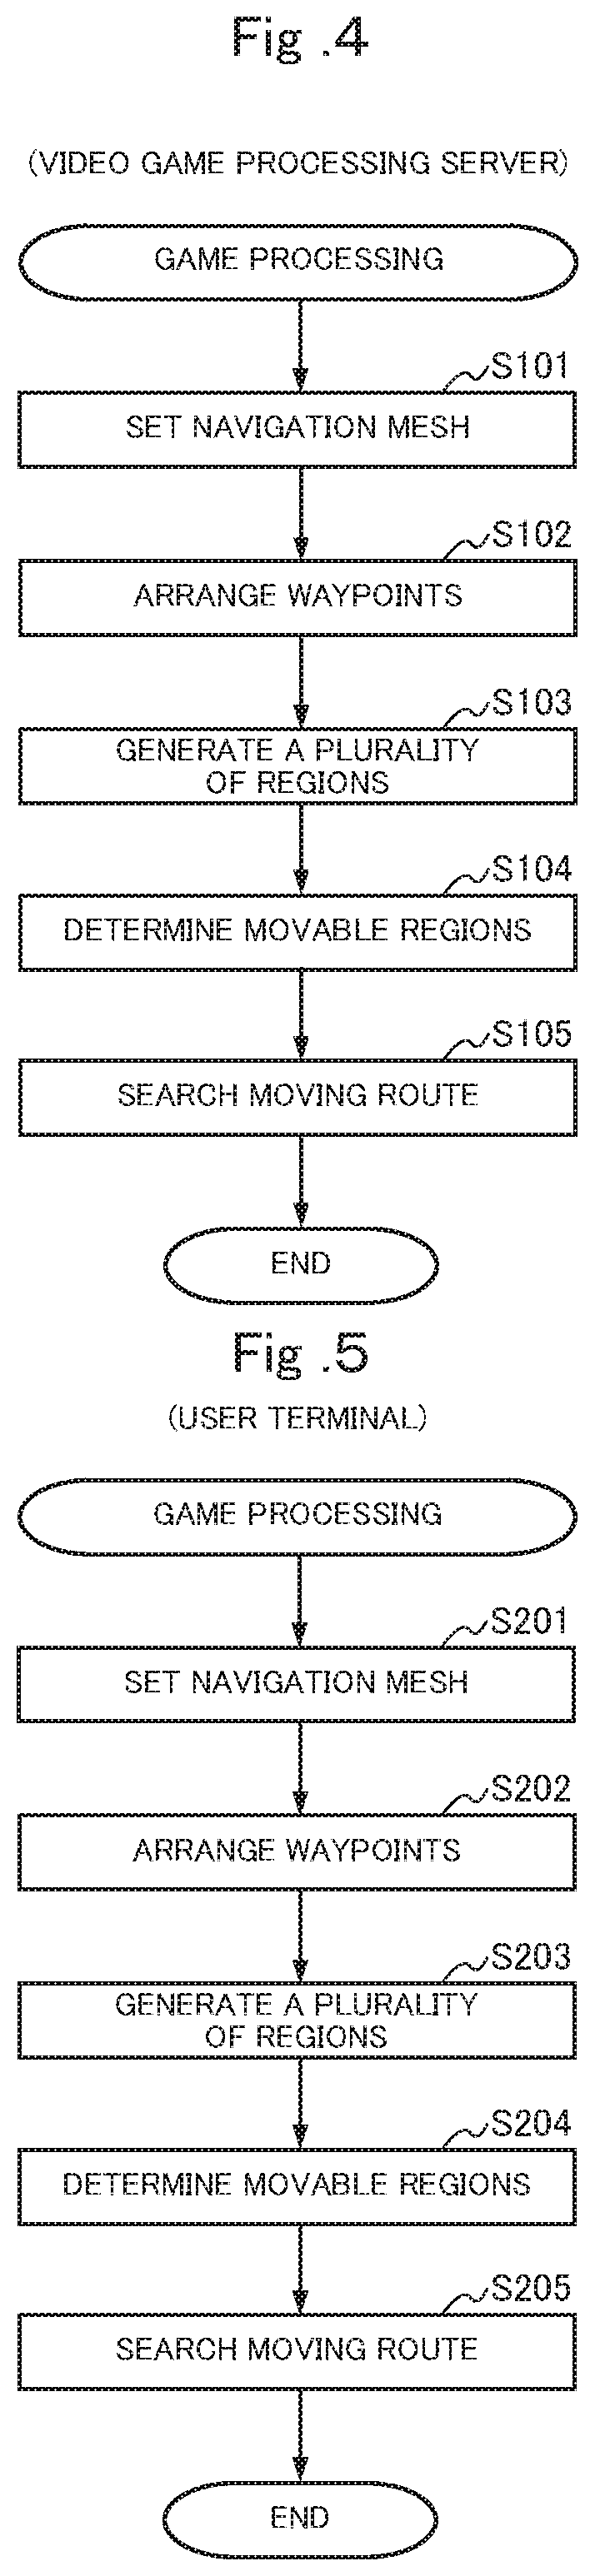 Non-transitory computer-readable medium and video game processing system